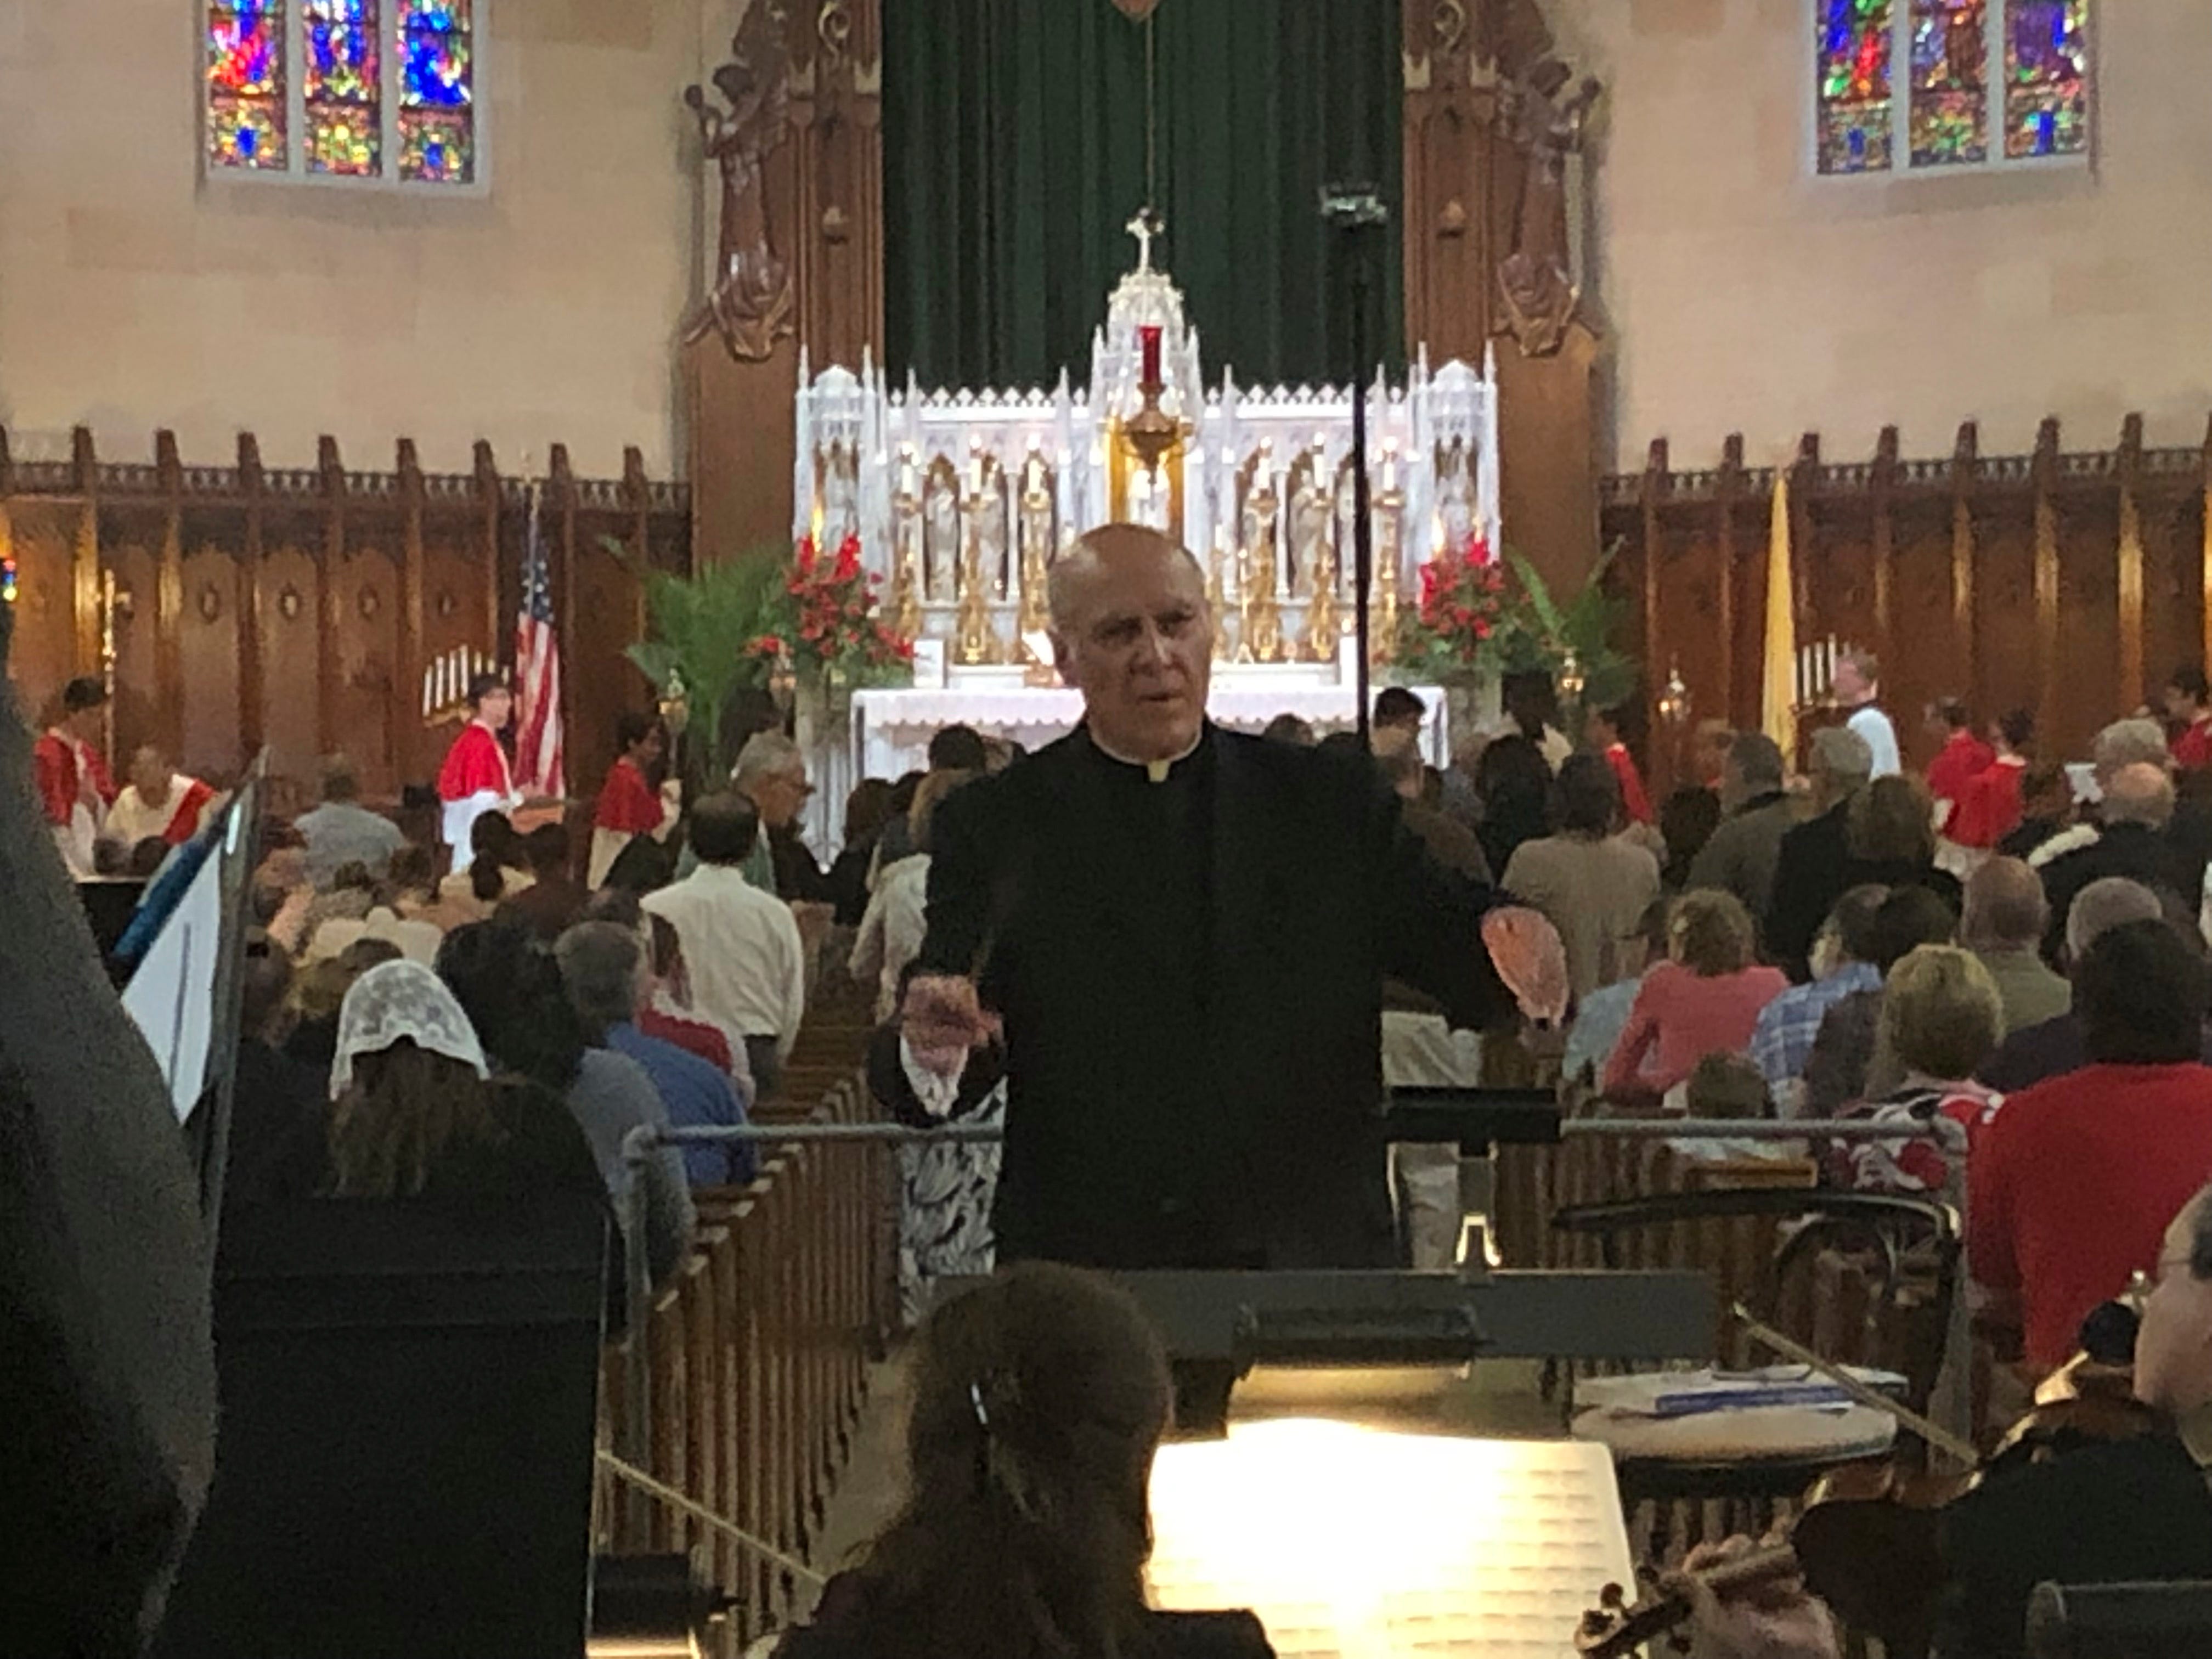 The Rev. Eduard Perrone conducts a choir during a Mass at The Assumption of the Blessed Virgin Mary Church in Detroit on June 9. Perrone was a co-founder of a small nonprofit organization called Opus Bono Sacerdotii which has provided money, shelter, transport, legal help and other support to priests accused of sexual abuse.